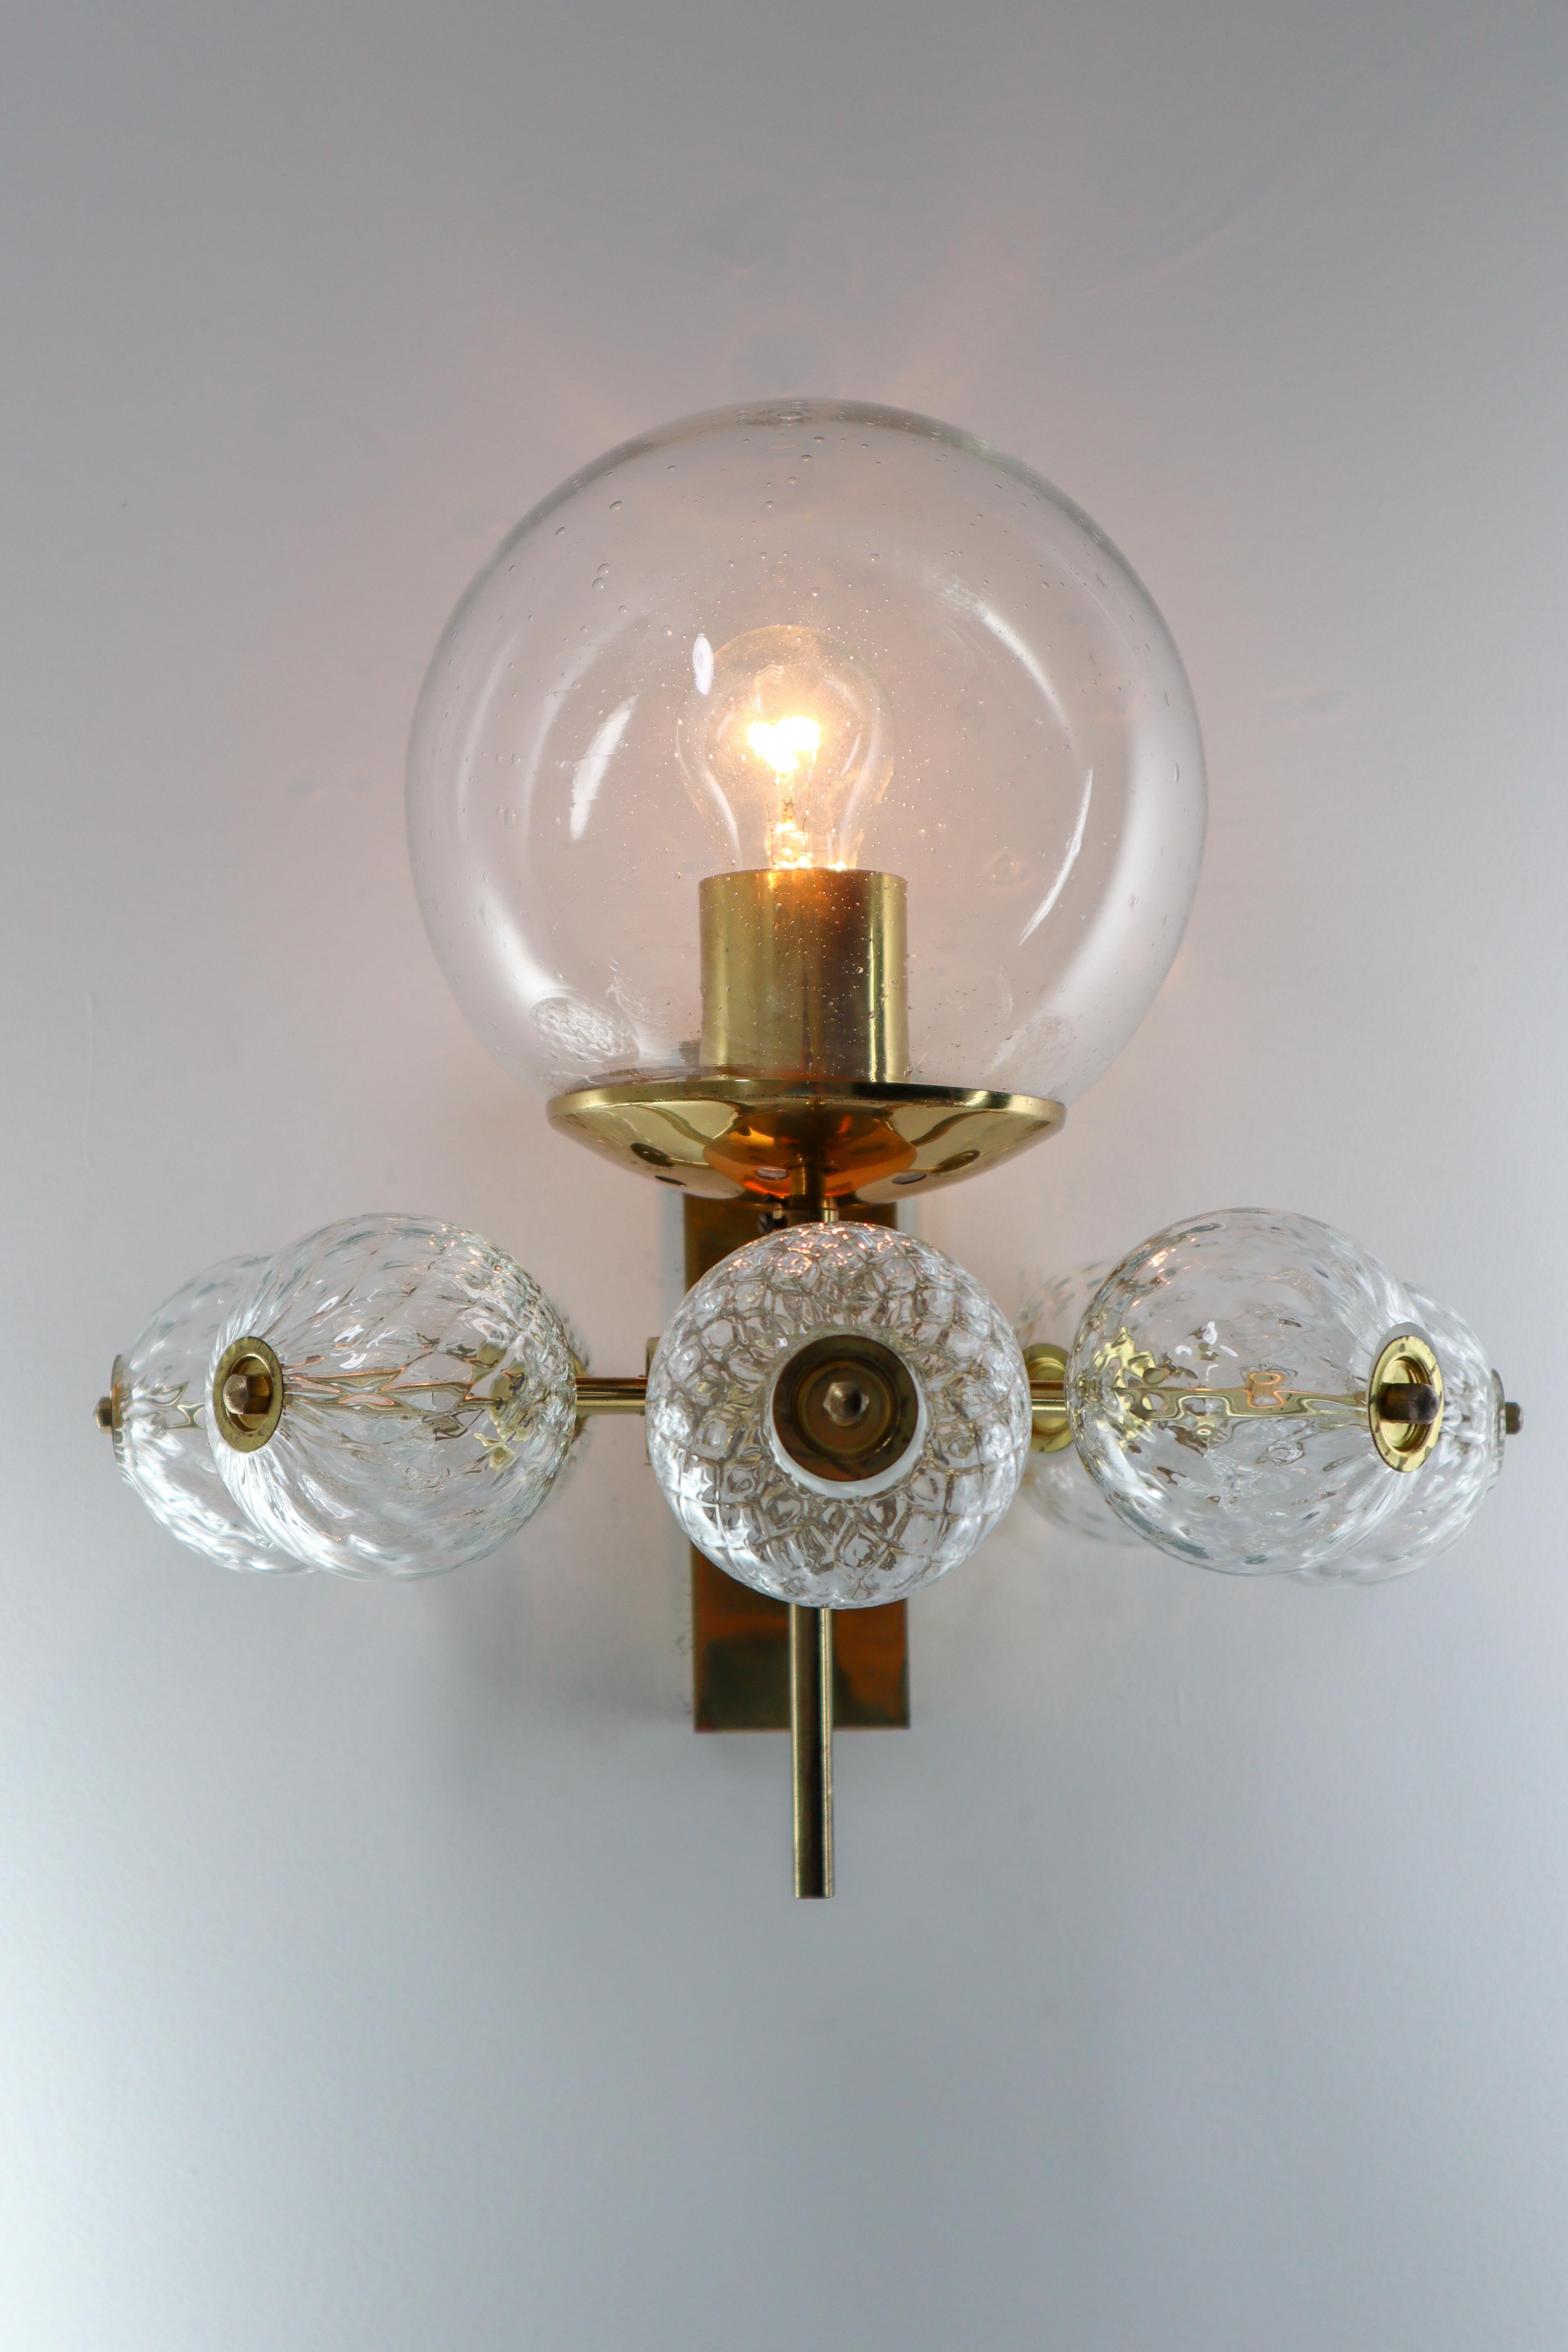 Blown Glass Hotel Wall Chandeliers with Brass Fixture, European, 1970s For Sale